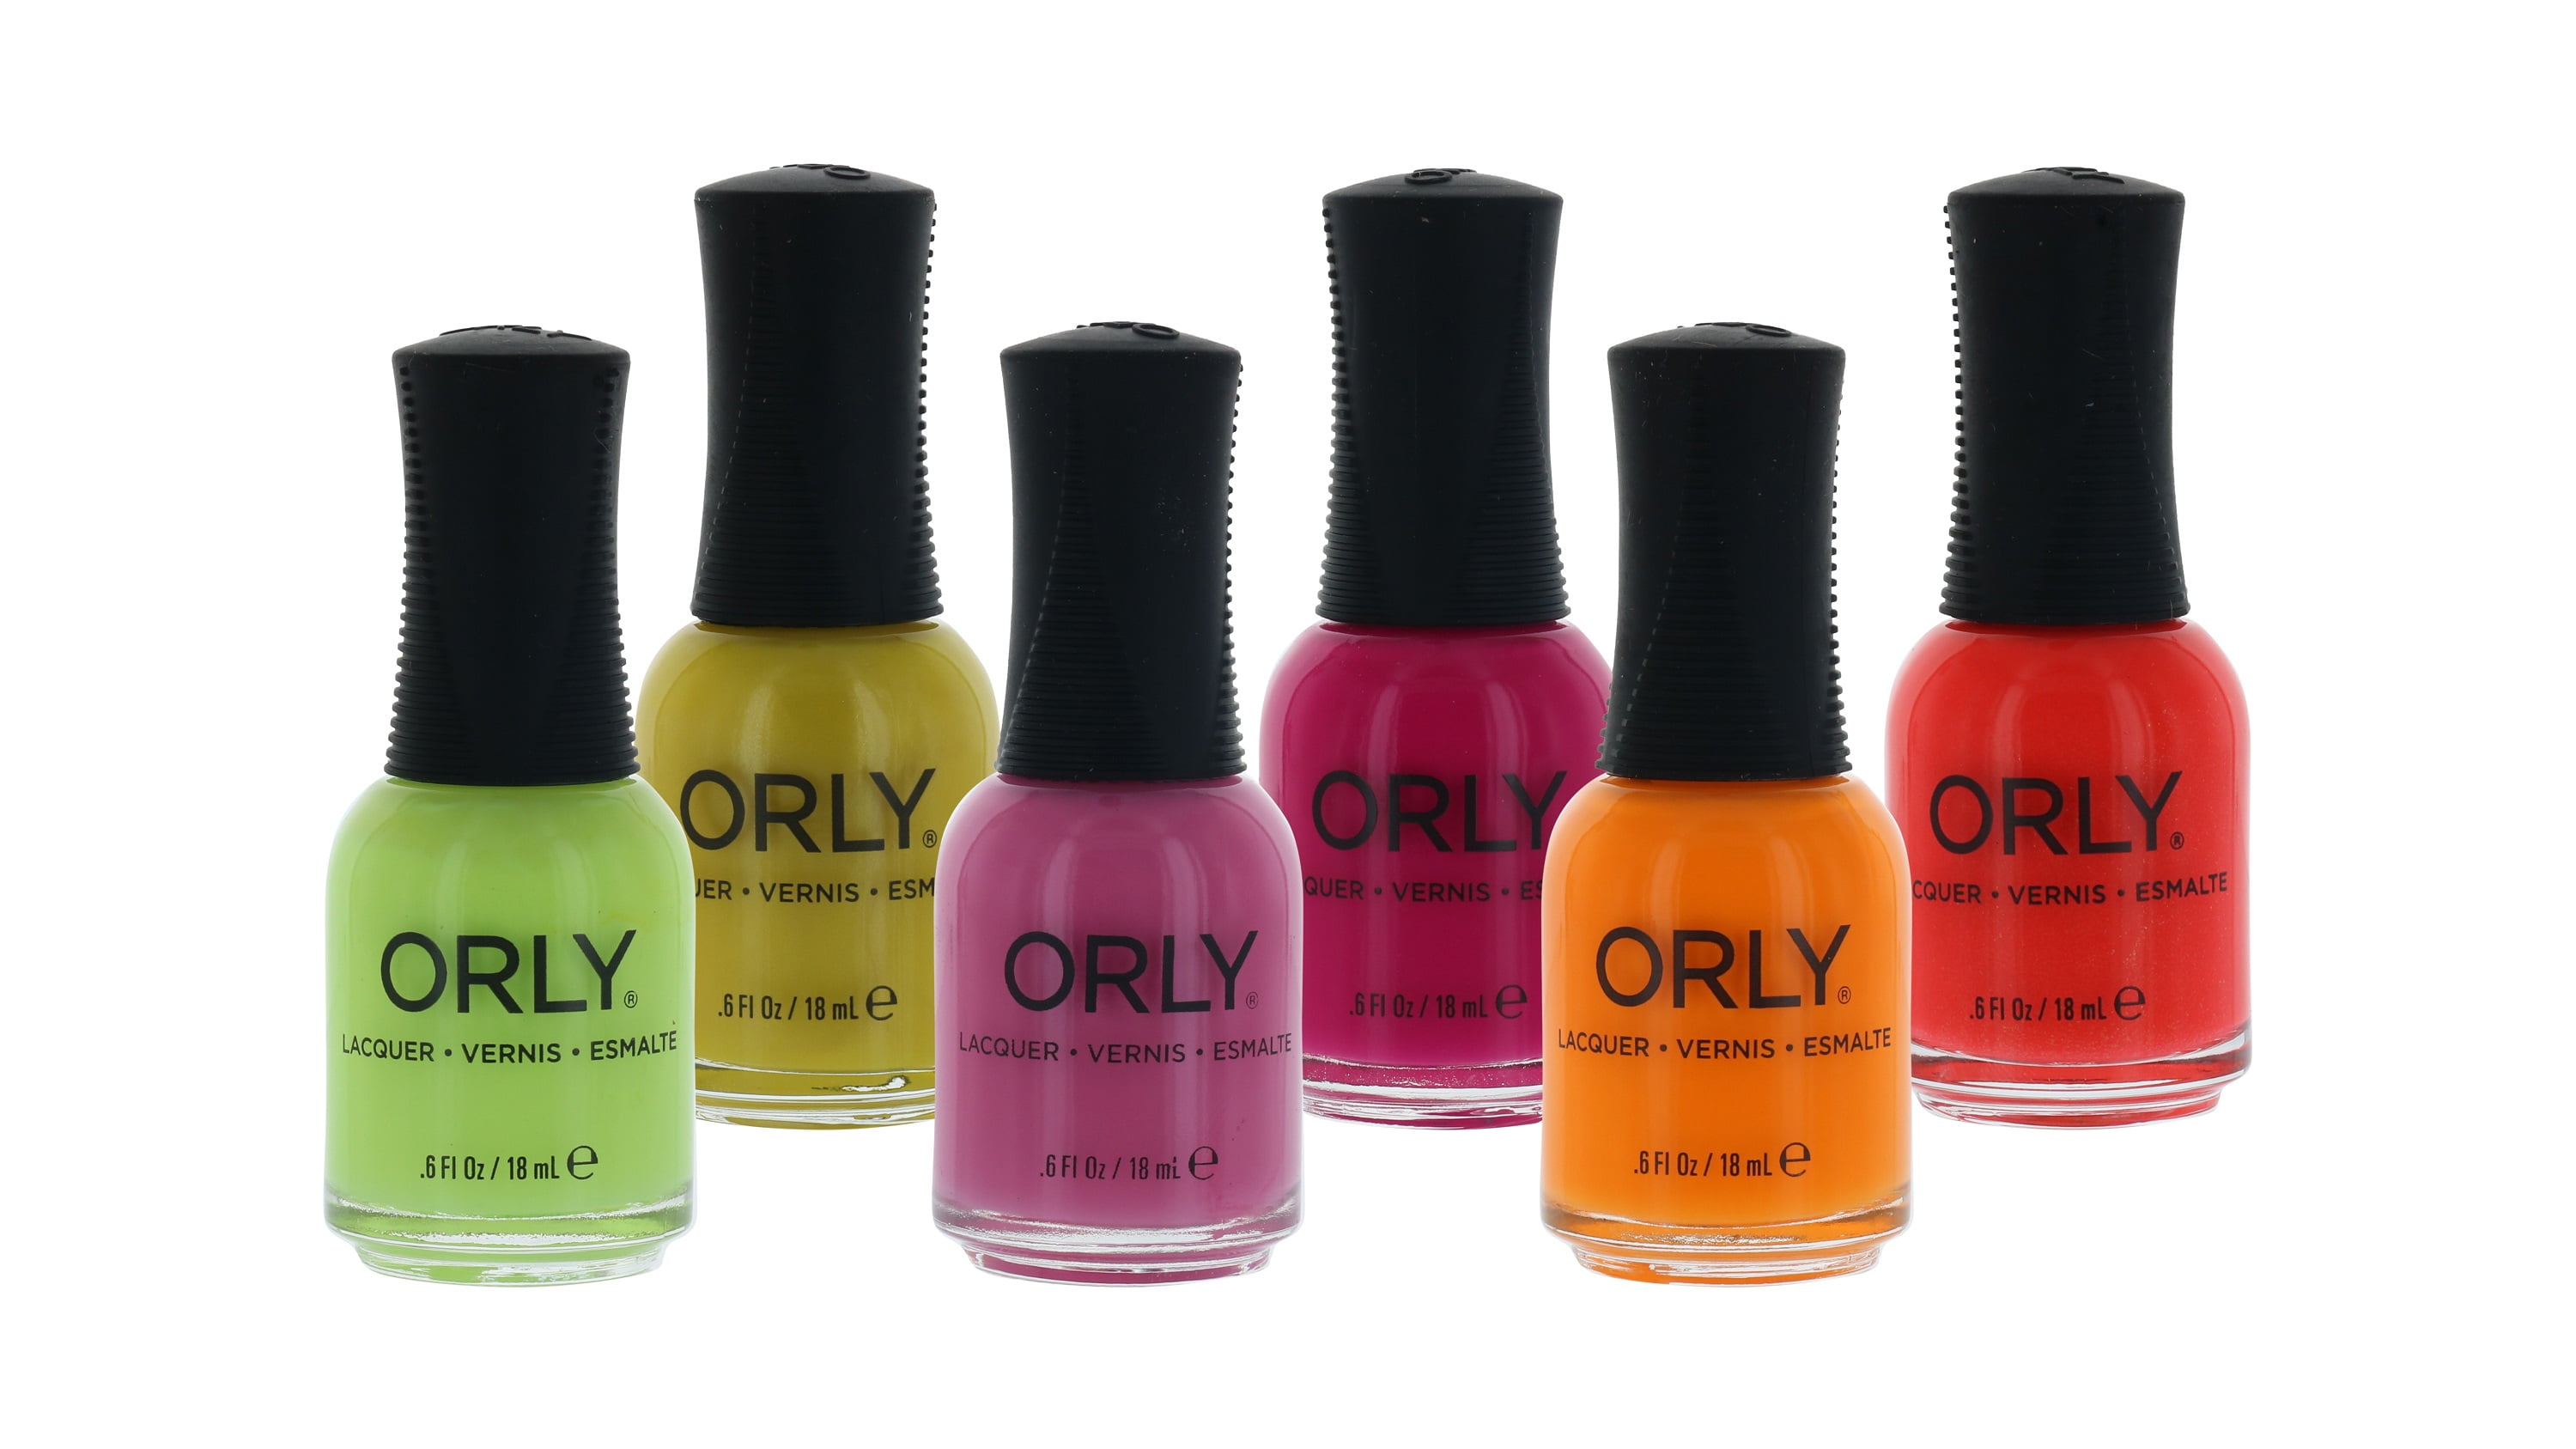 7. Orly Nail Lacquer in "Color Flip" - wide 2